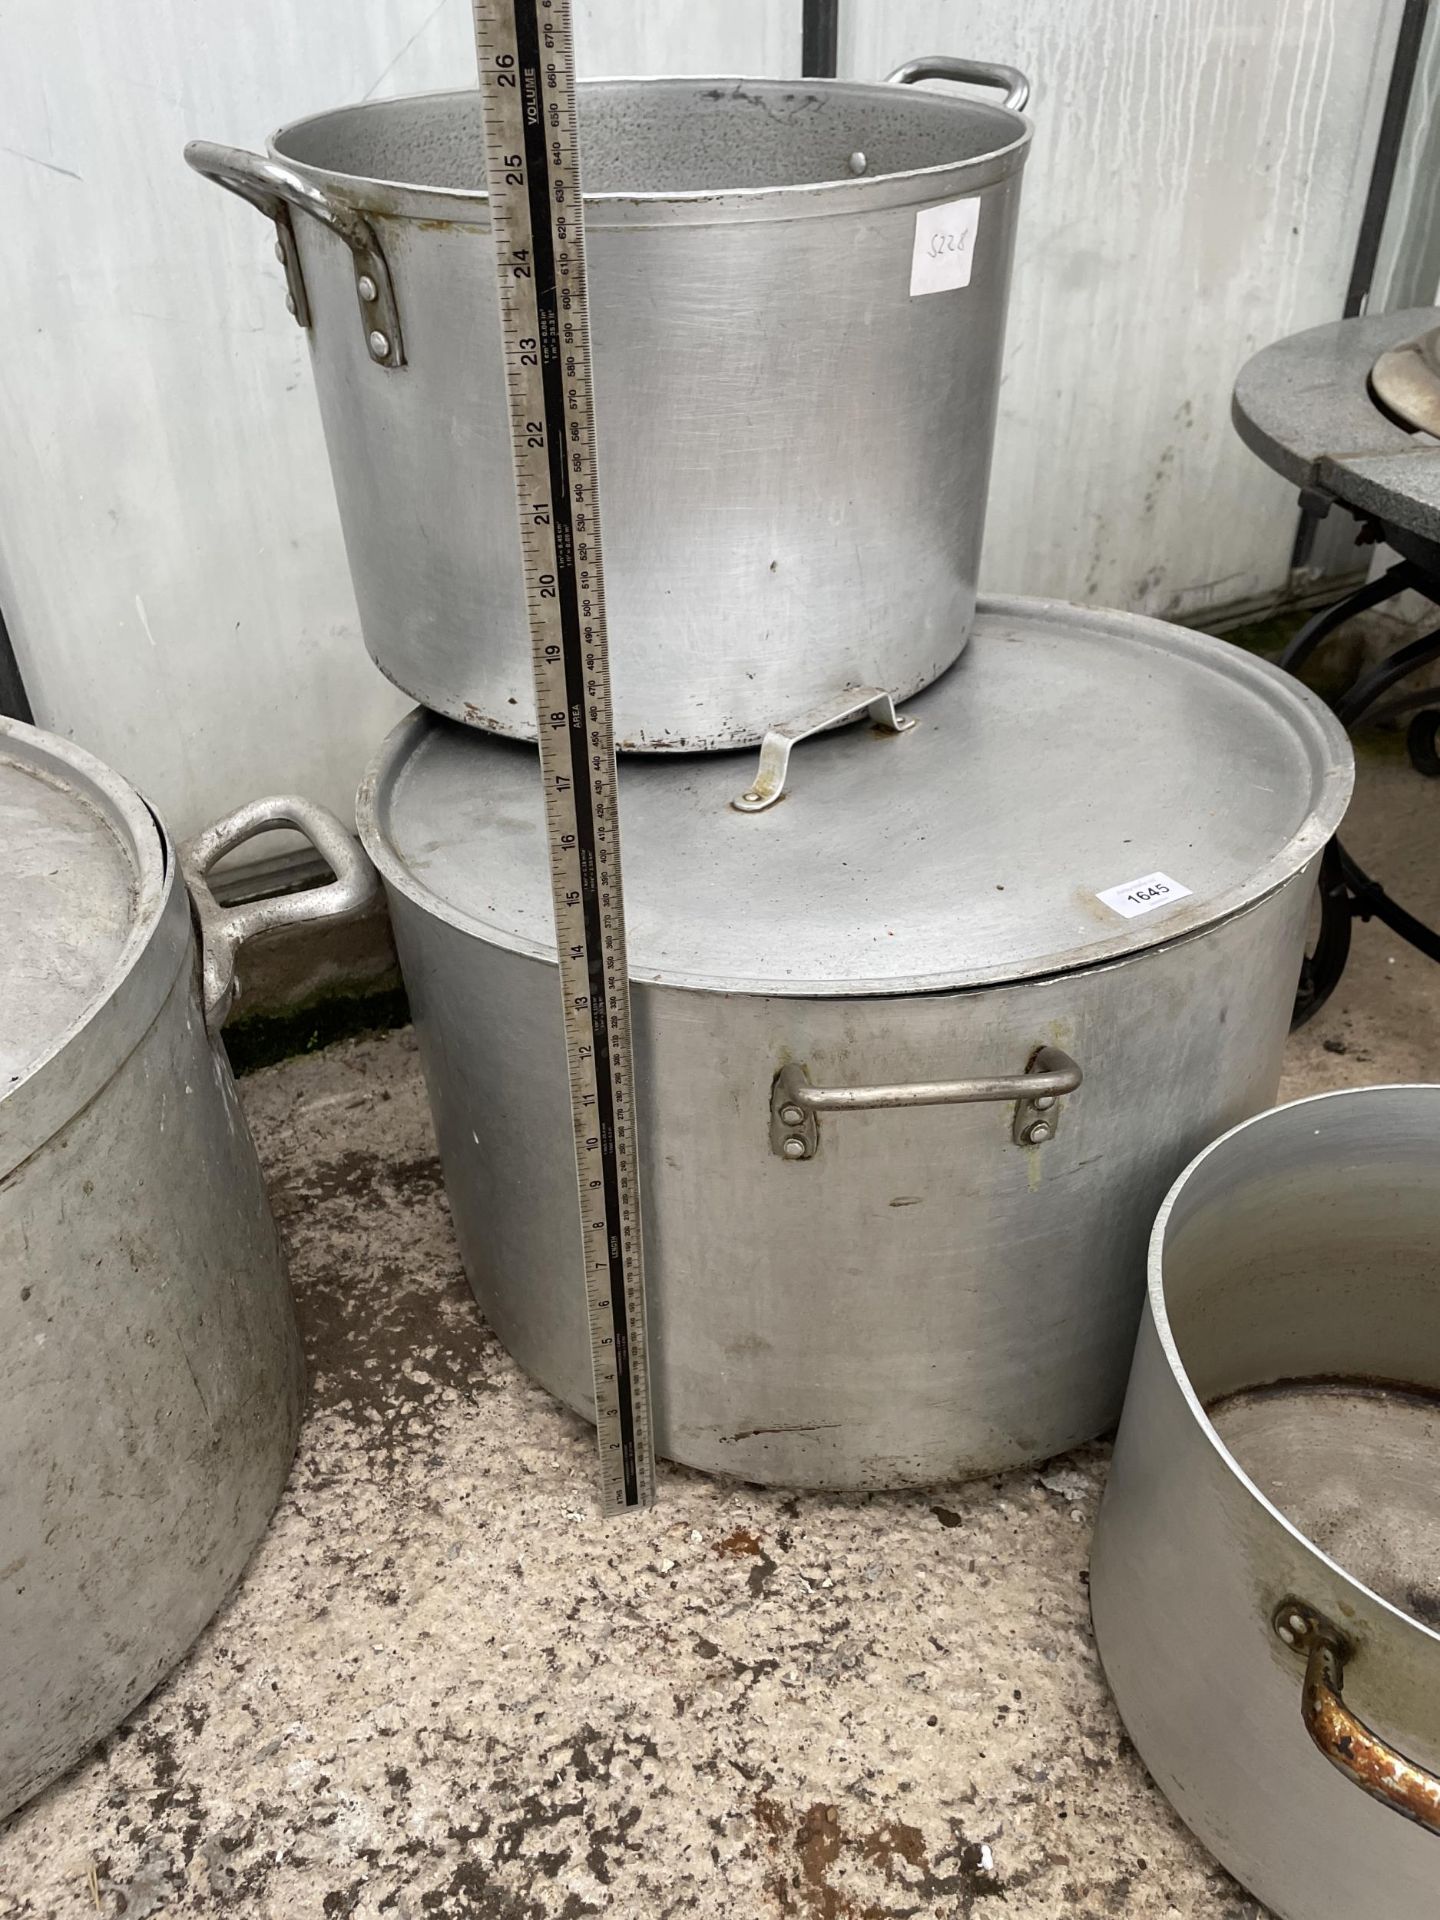 THREE LARGE ALUMINIUM COOKING POTS, ONE COMPLETE WITH LID - Image 2 of 6